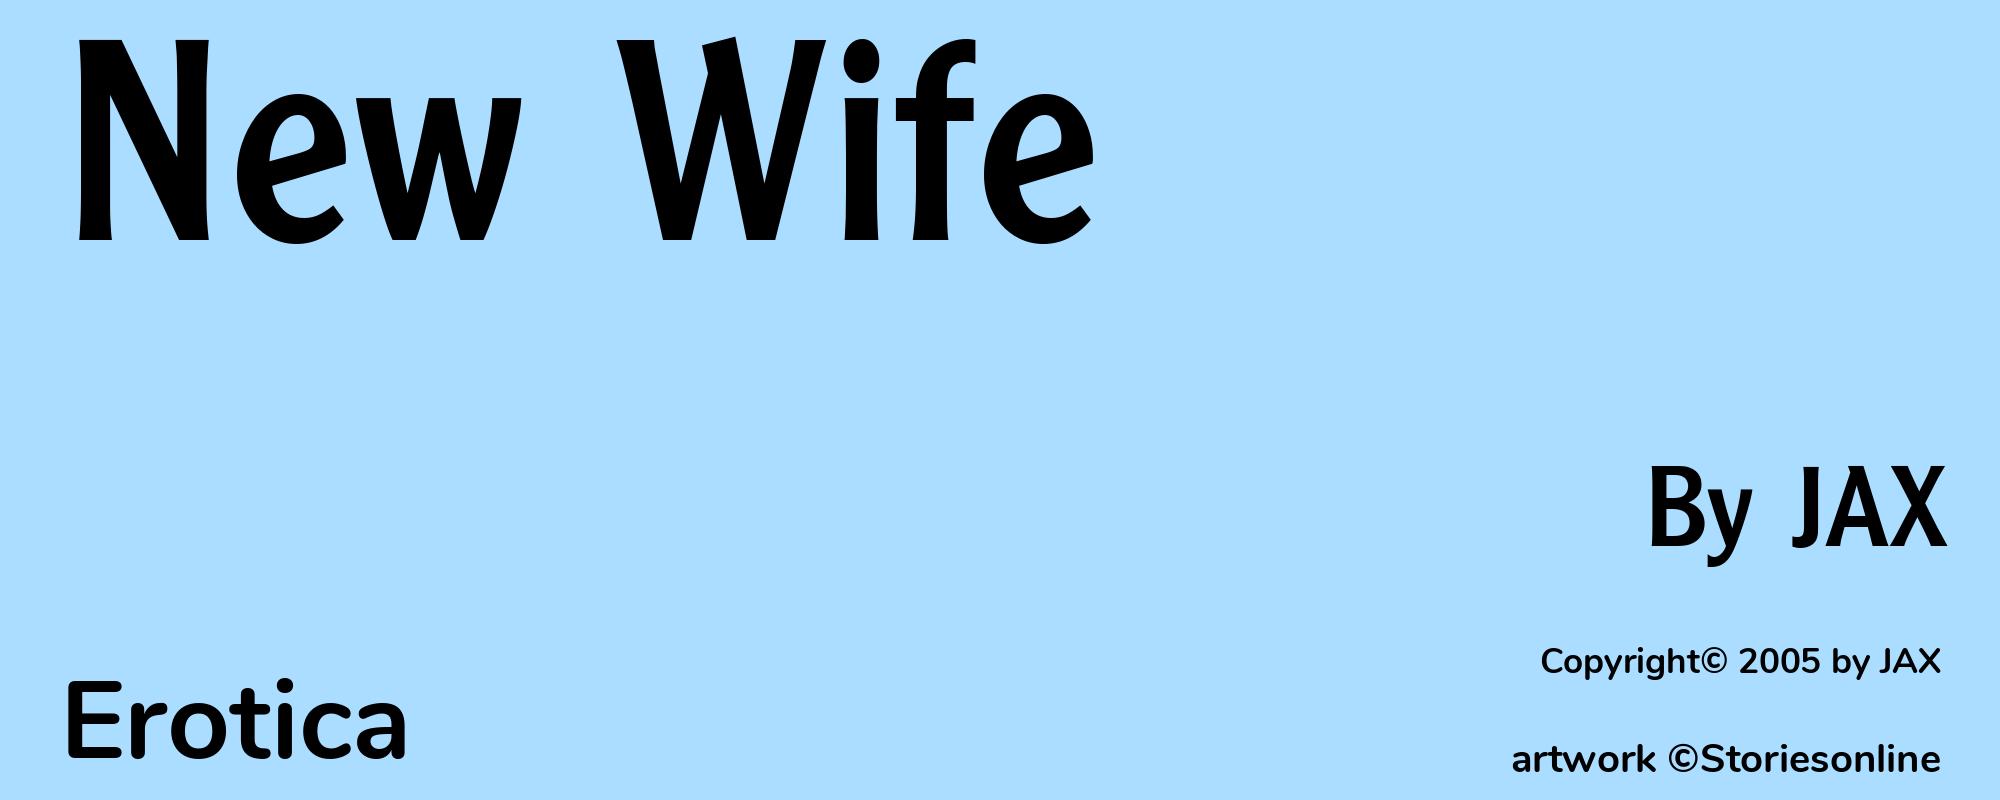 New Wife - Cover